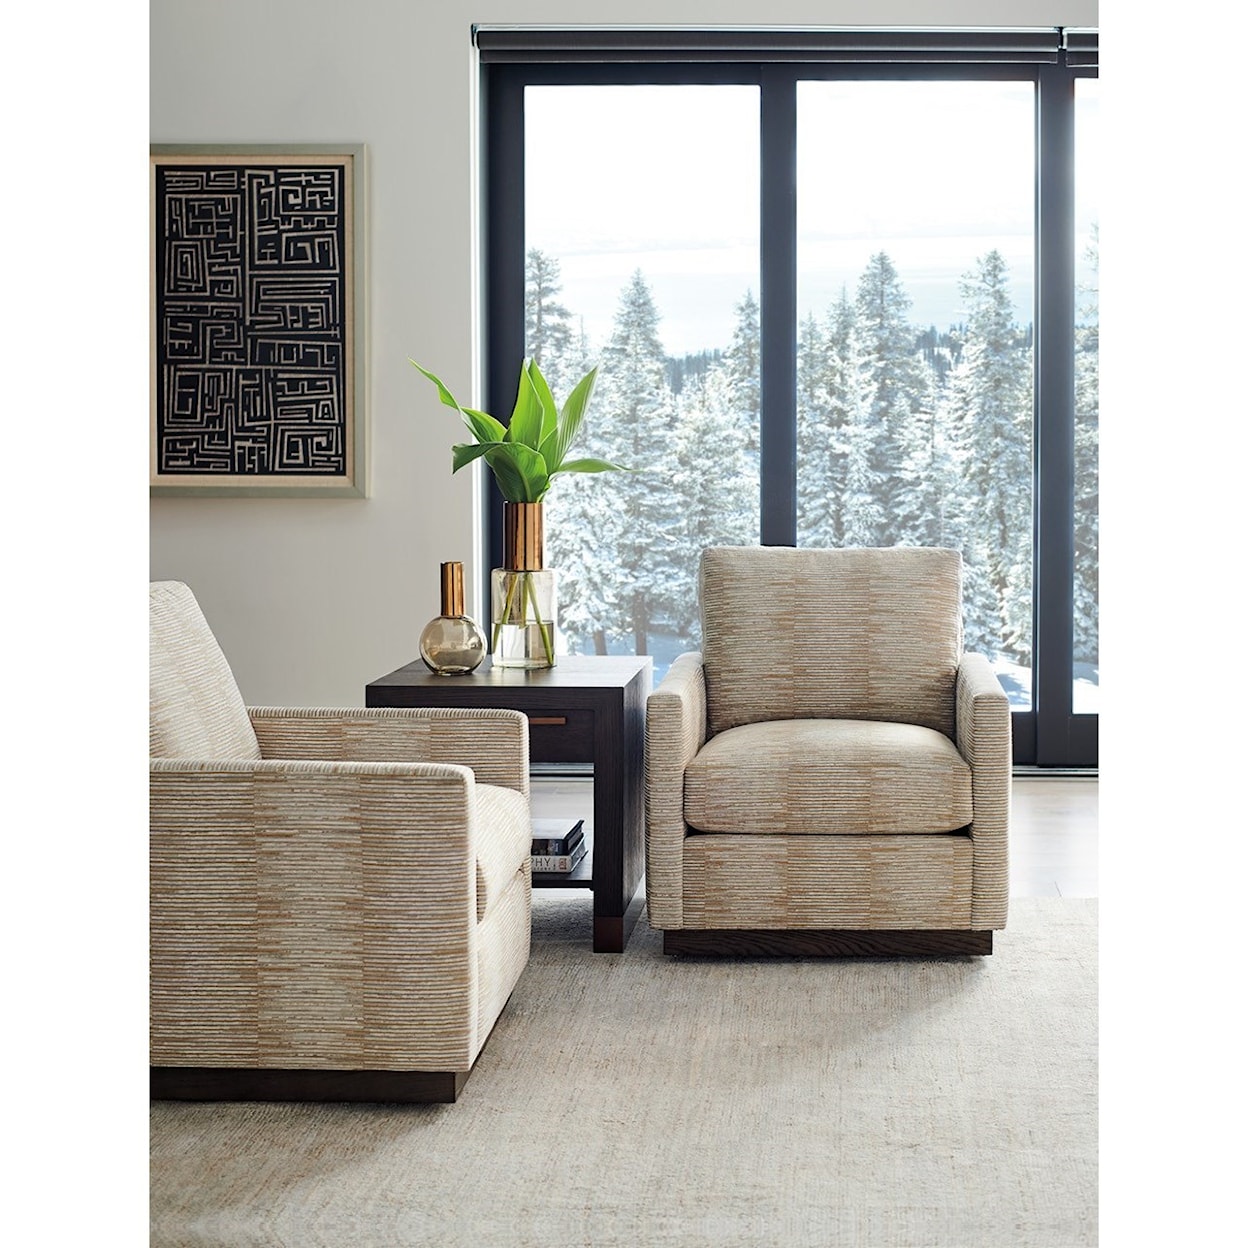 Barclay Butera Barclay Butera Upholstery Meadow View Chair